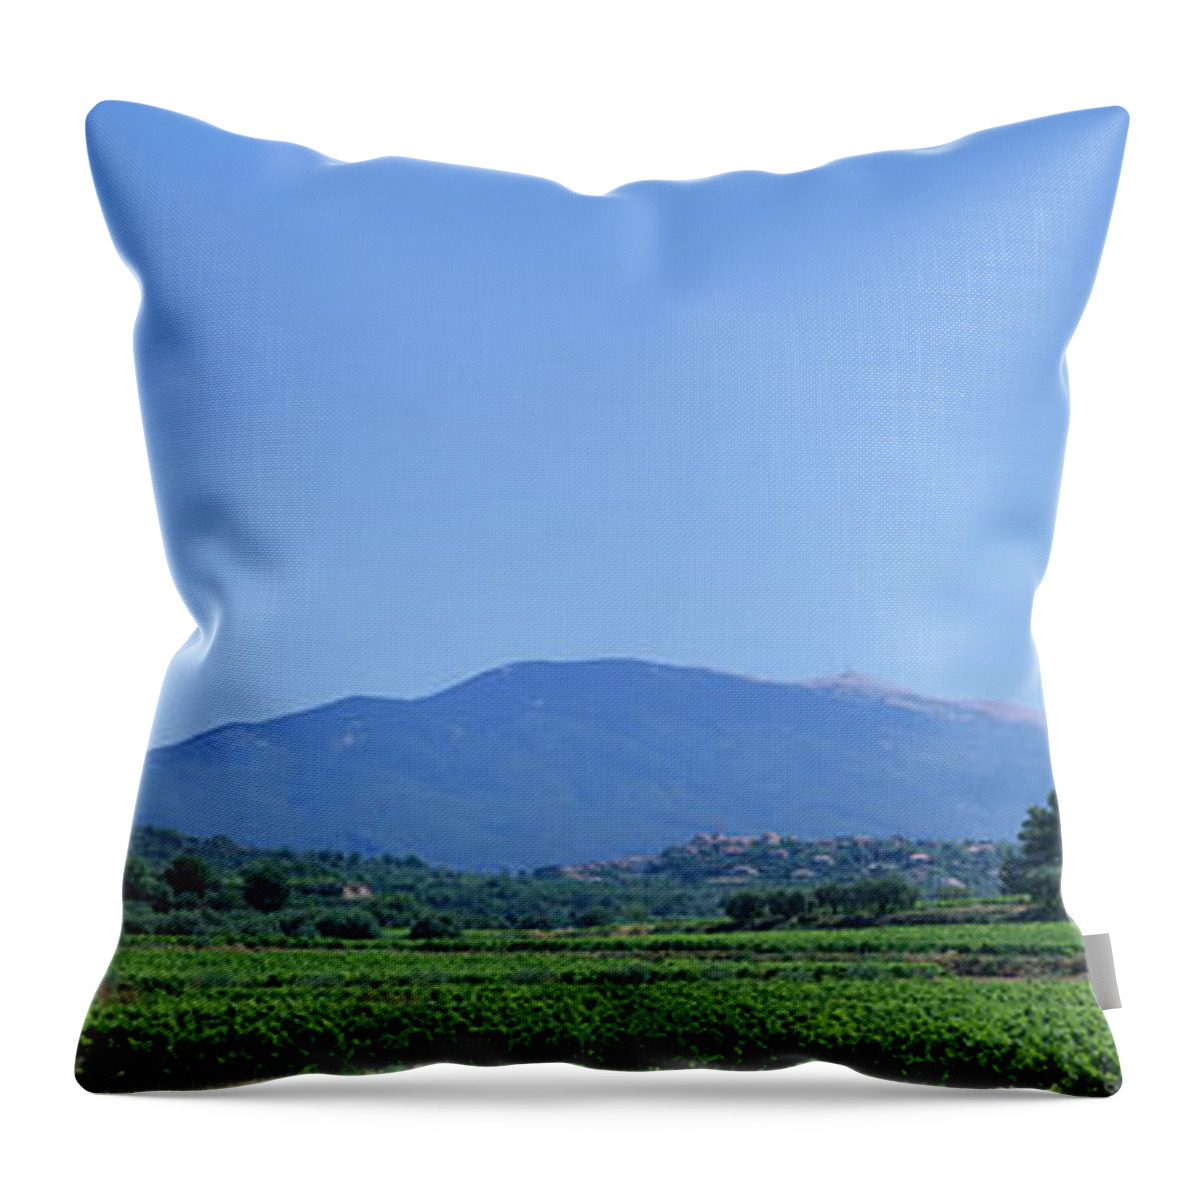 Scenics Throw Pillow featuring the photograph France, Provence, Luberon, Village Of by Martial Colomb